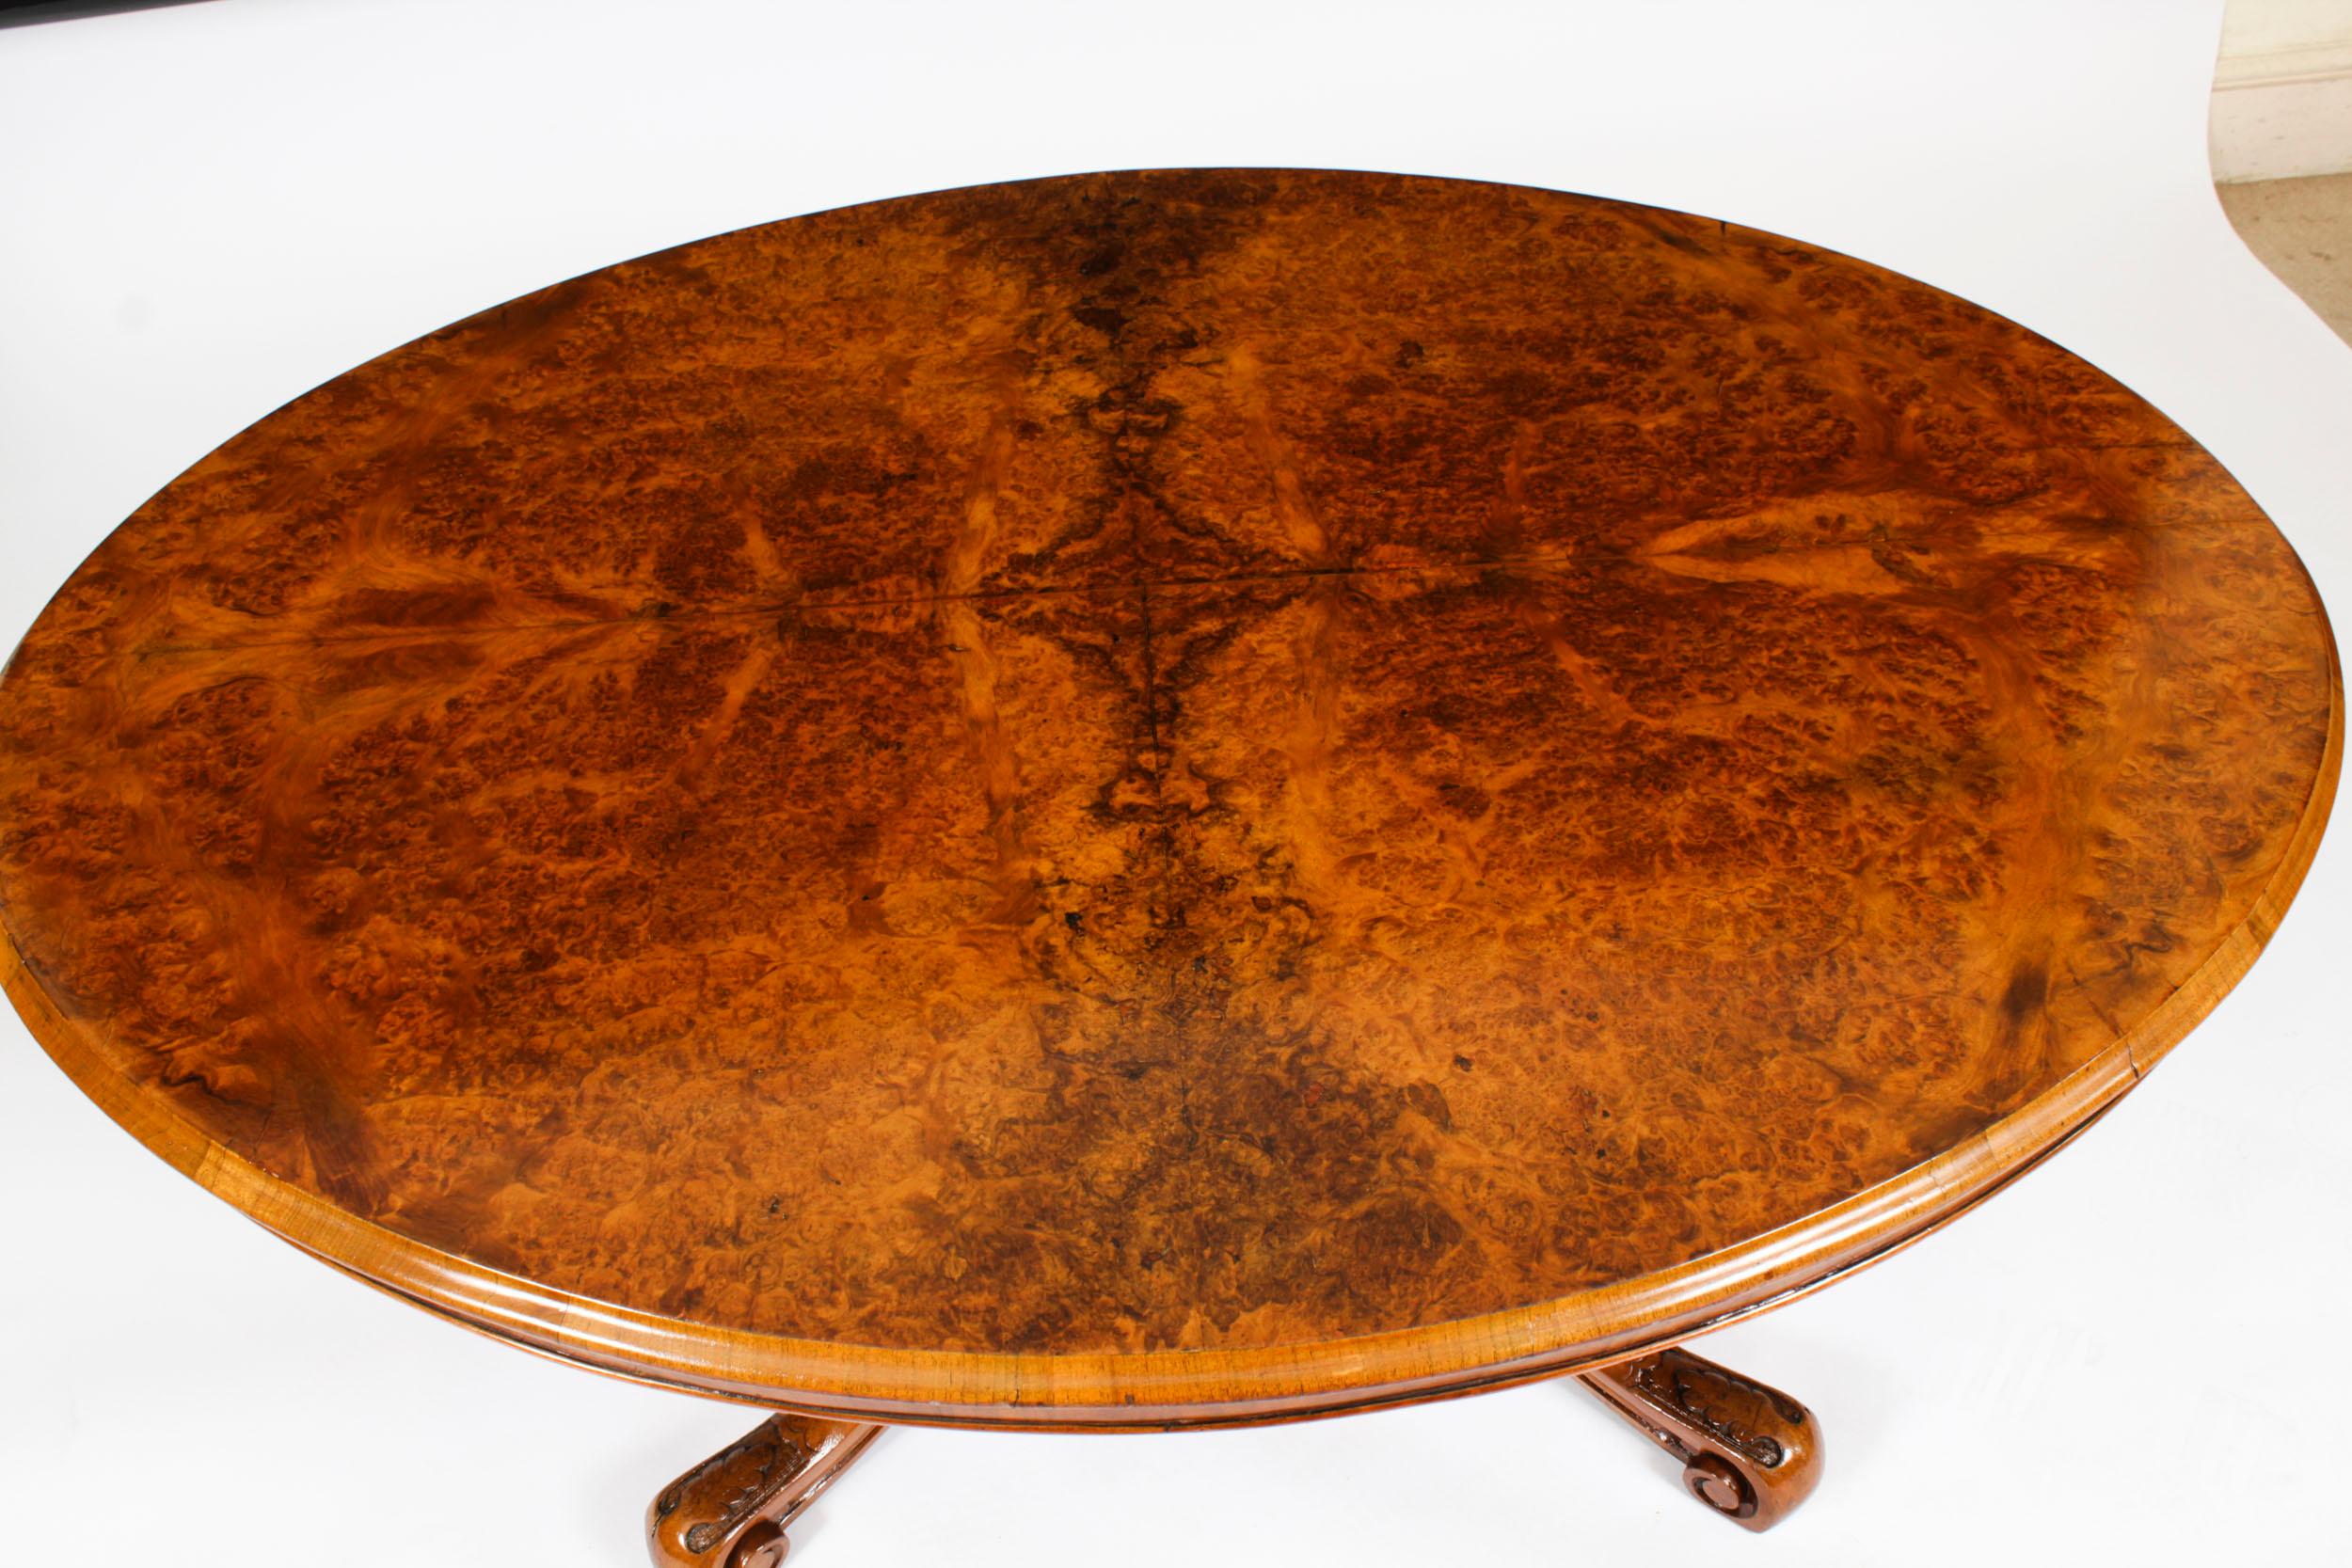 Mid-19th Century Antique Burr Walnut Oval Coffee Table 1860s 19th Century For Sale